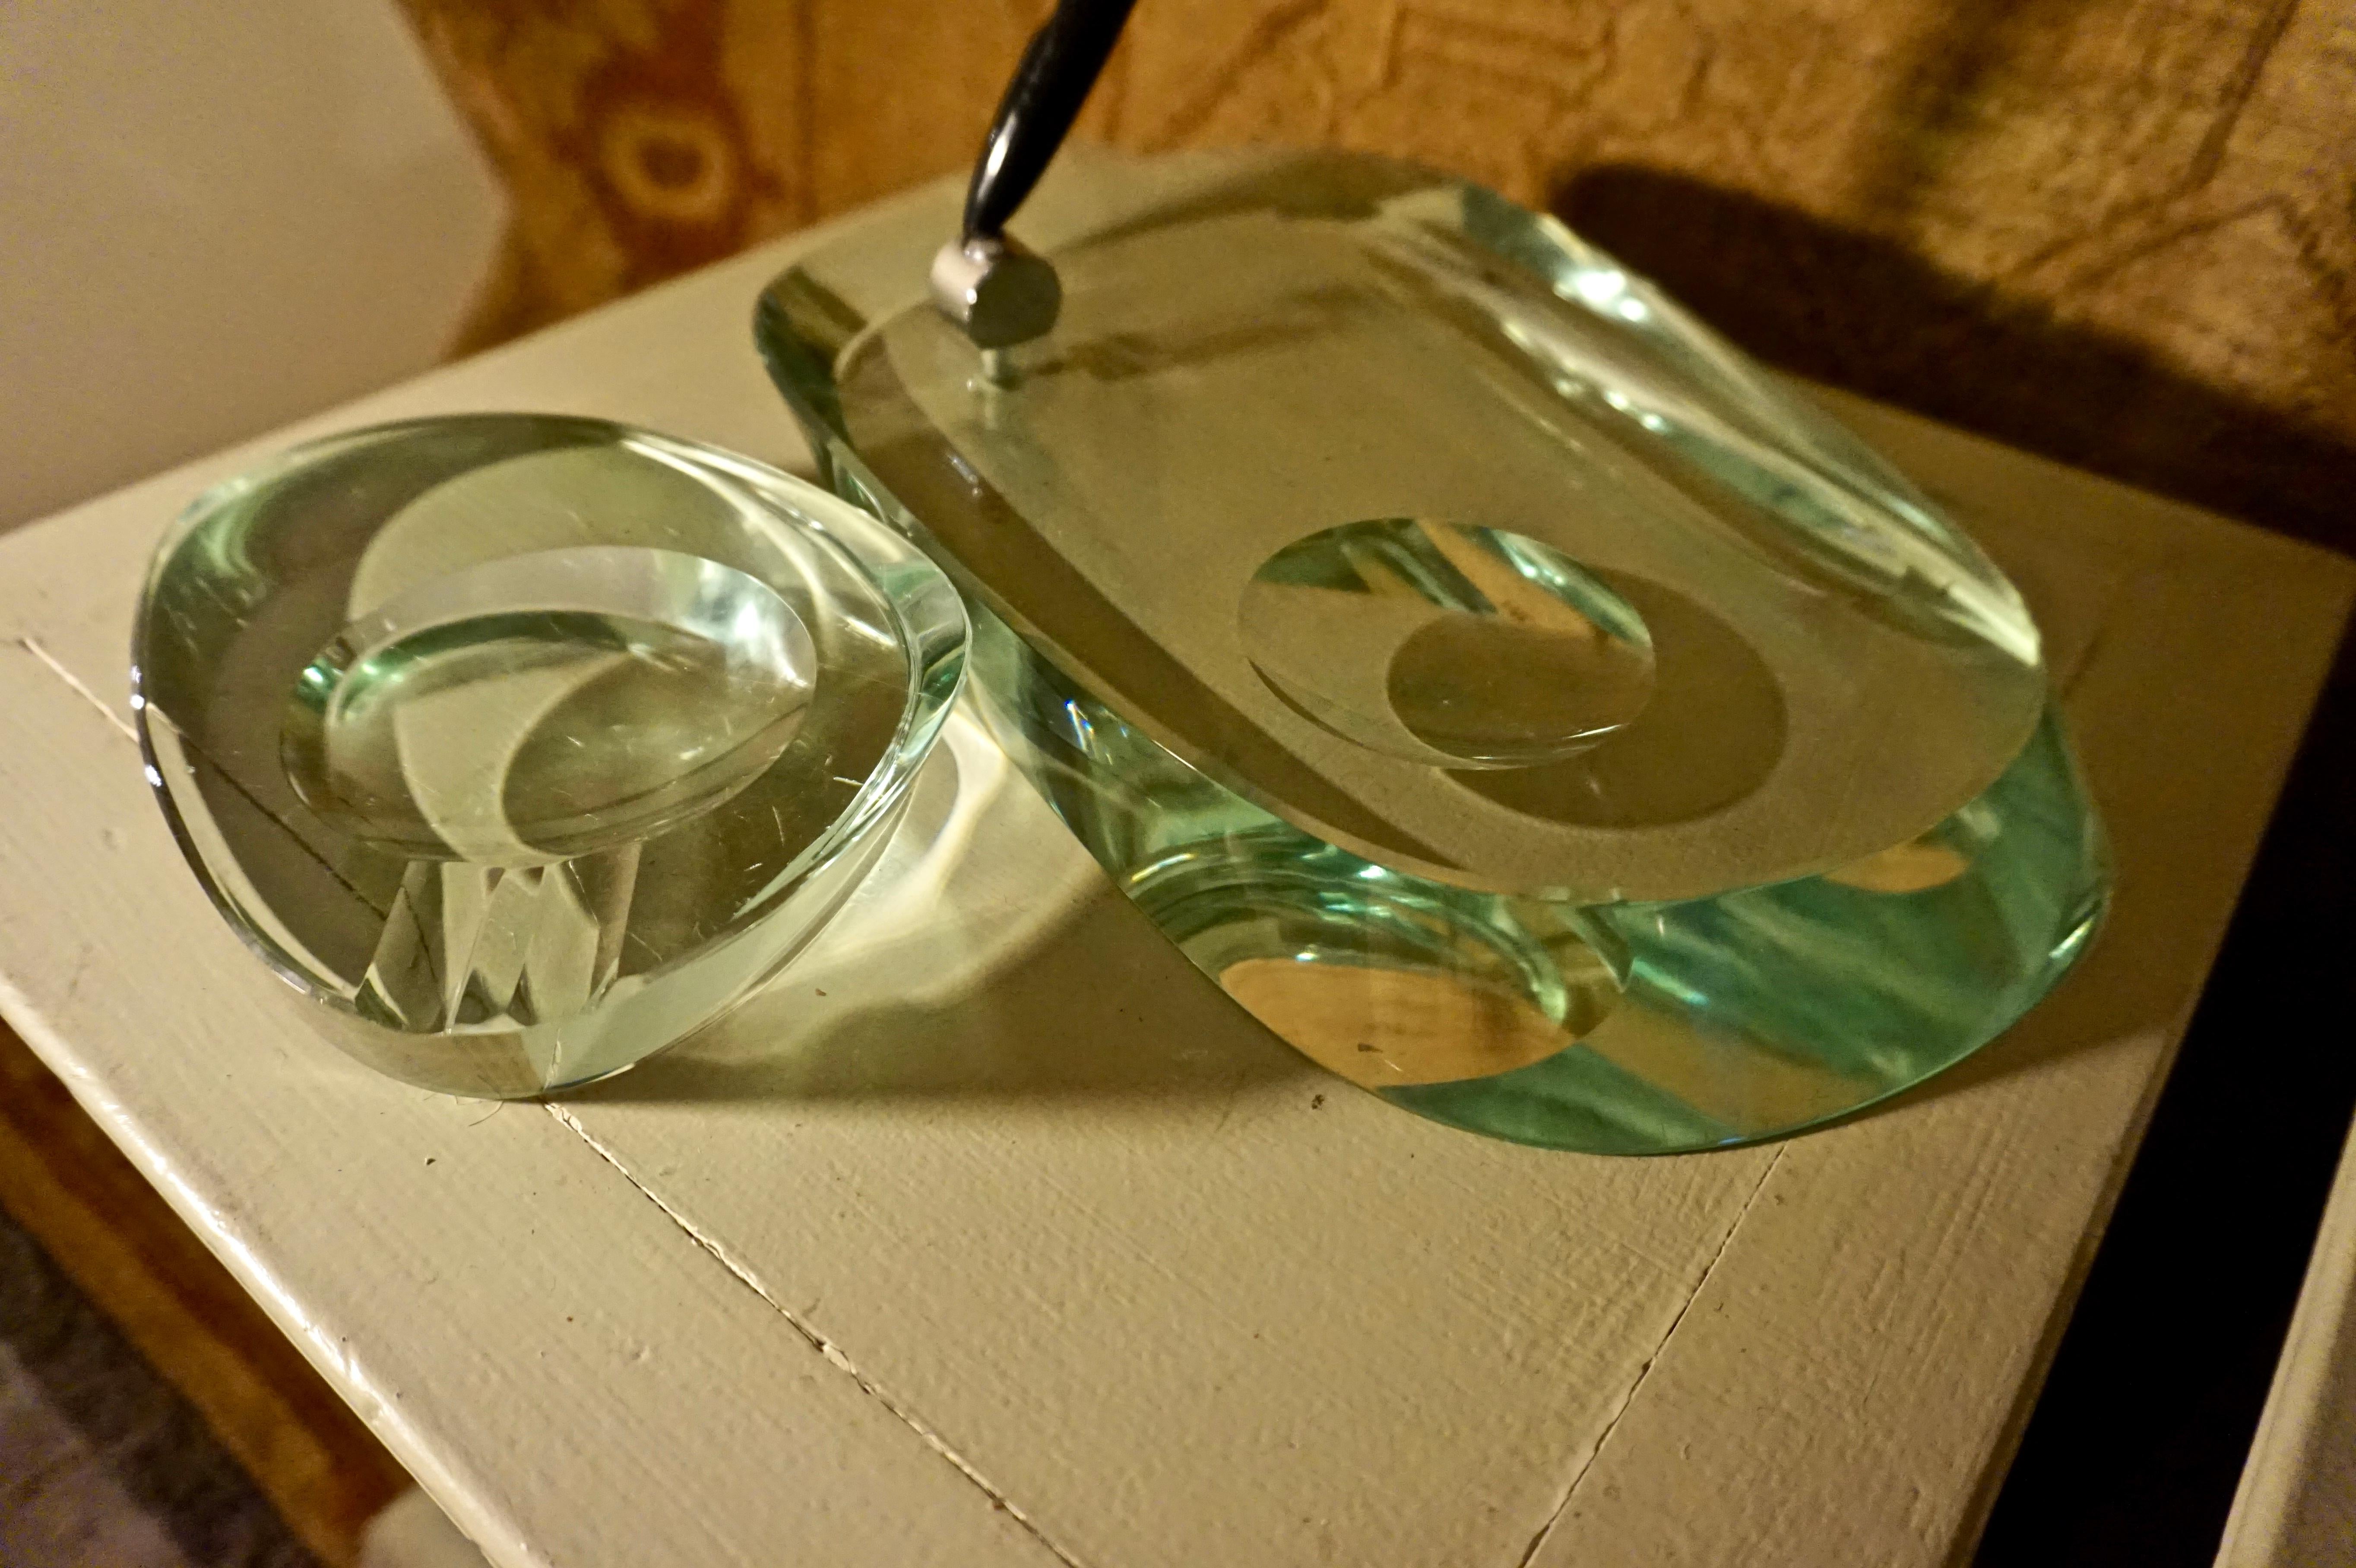 Circa 1950's

Thick slabs of light sea green glass pen stand and ashtray desk set by the esteemed Fontana Arte company. Original condition down to pen holder screw. Minor scratches consistent with age but shows beautifully and exudes gravitas.